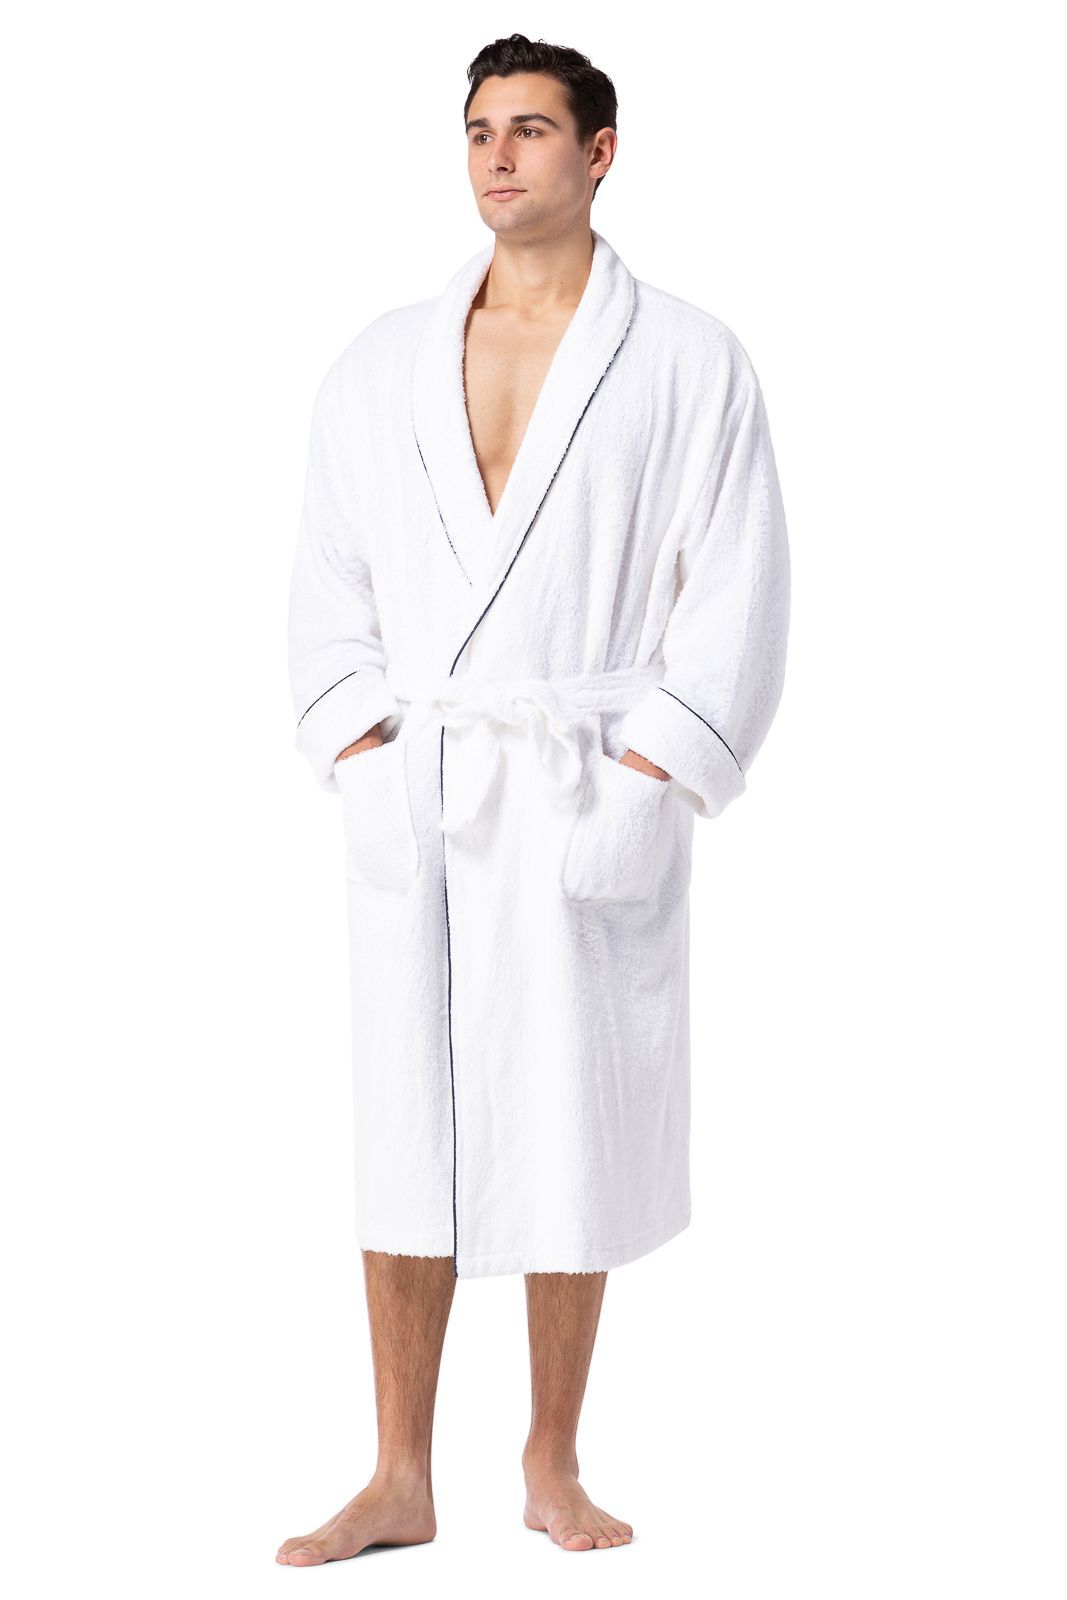 Fishers Finery Mens white terry robe features a quilted design, front pockets, and belt—the perfect robe for after the shower or relaxing at home 